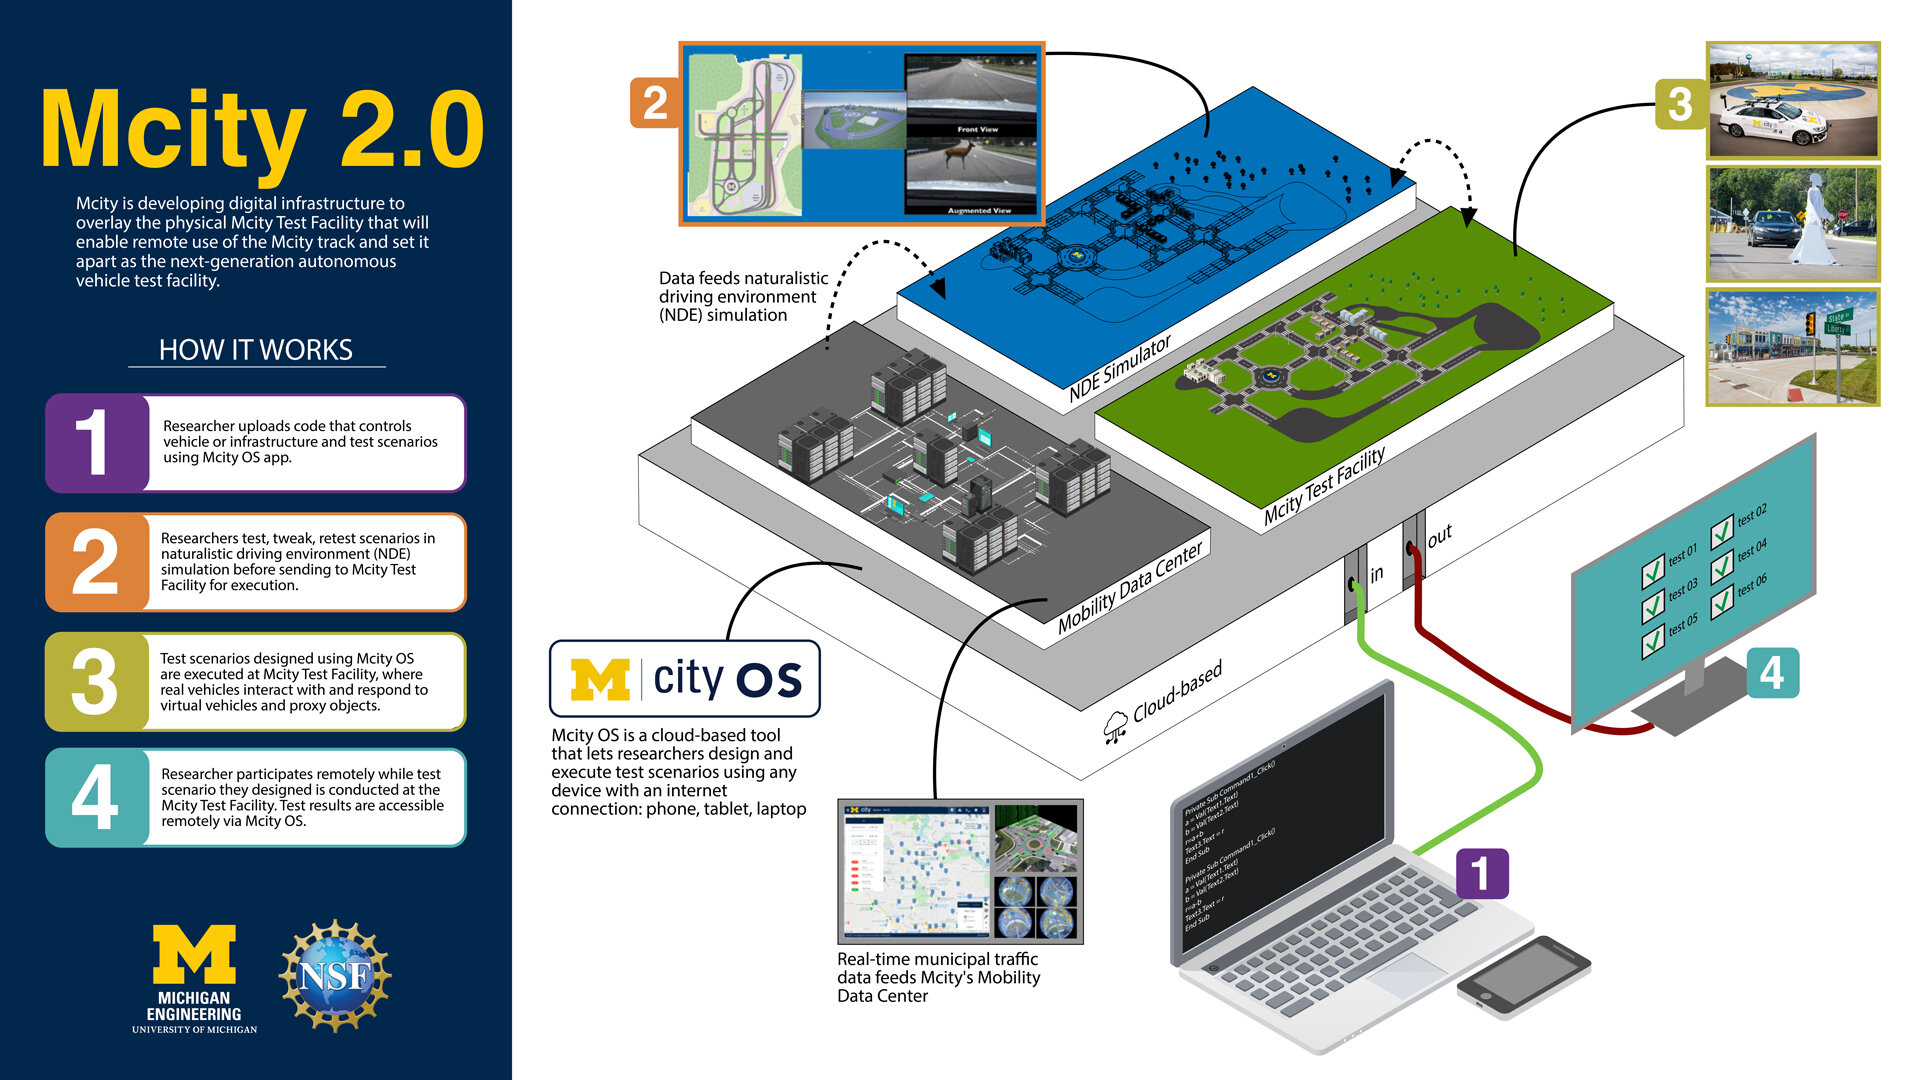 An overview of the Mcity facilty, showing both physical and virtual spaces for researchers. 1). a laptop is connected to the Mcity OS. 2). Data feeds into naturalistic driving environment simulation 3). Real vehicles within Mcity react and respond to virtual vehicles and proxy objects to test researchers code. 4). Researcher participates remotely and accesses results and data remotely via Mcity OS.